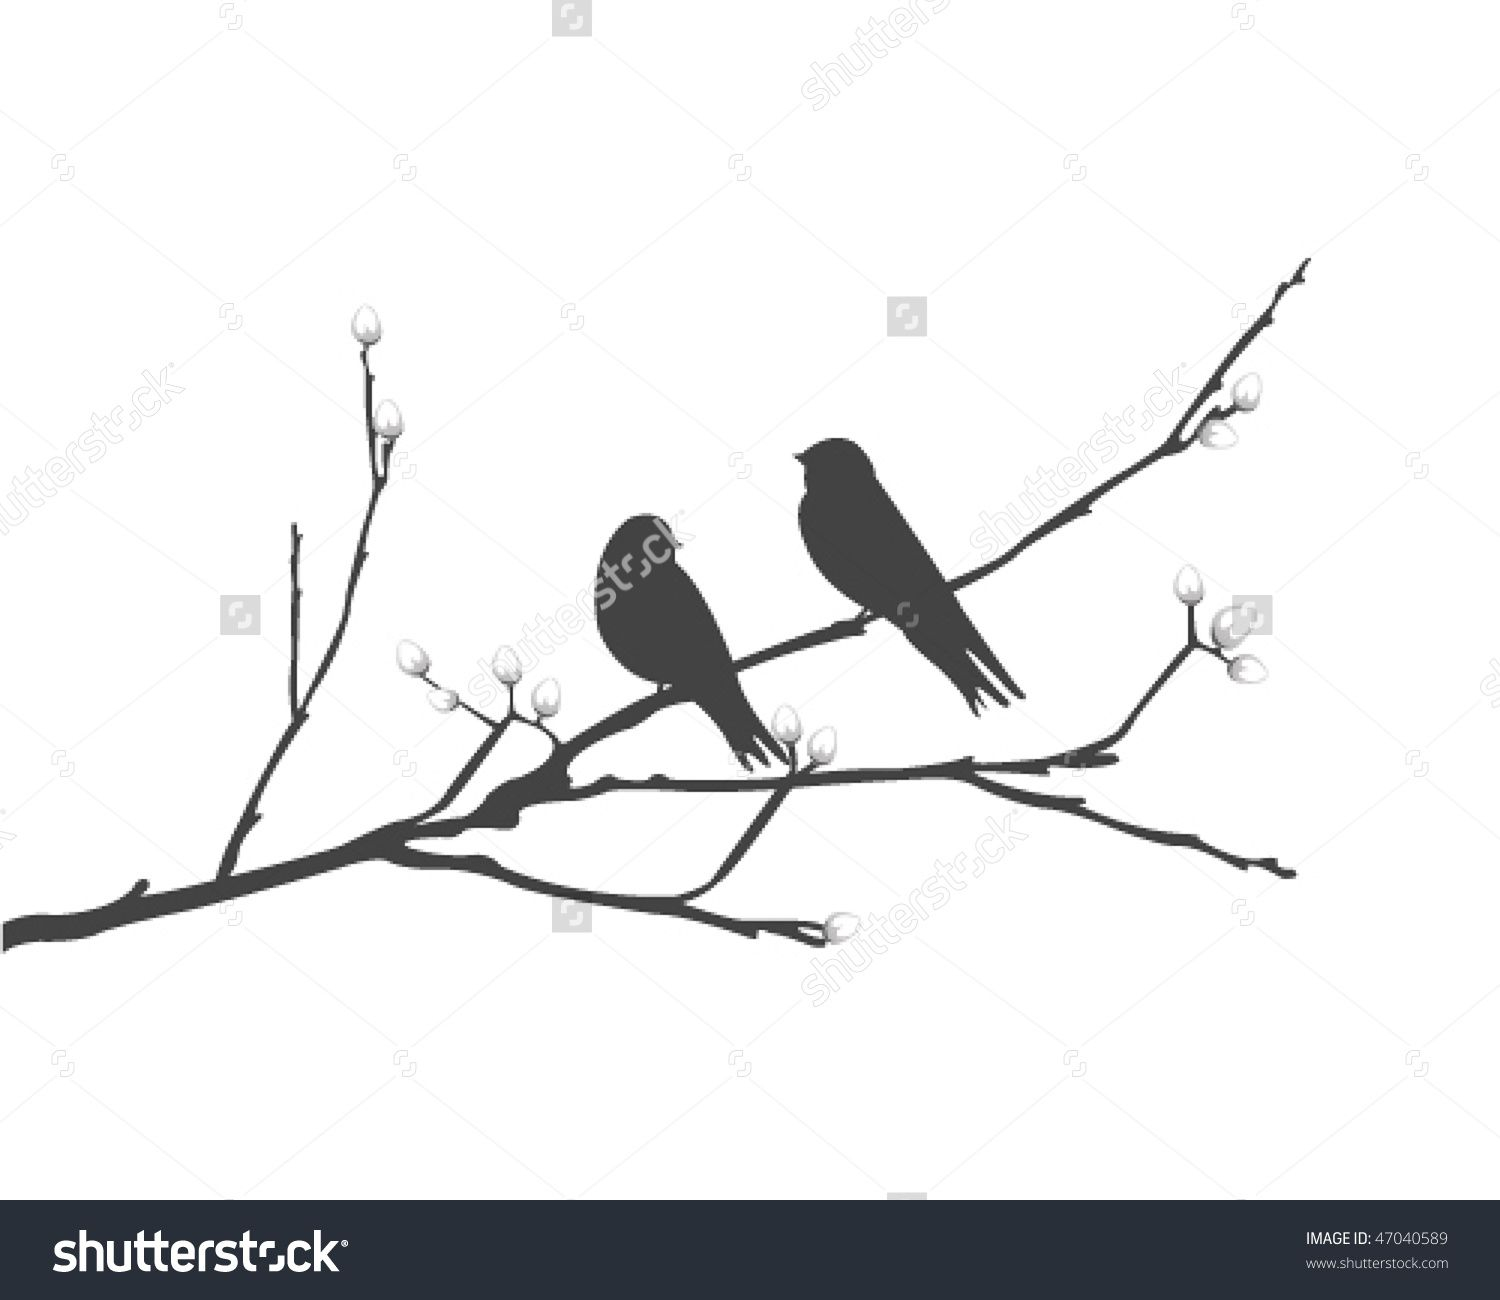 Image Result For Silhouette Birds On Branch Bird Tattoo Ideas intended for size 1500 X 1300